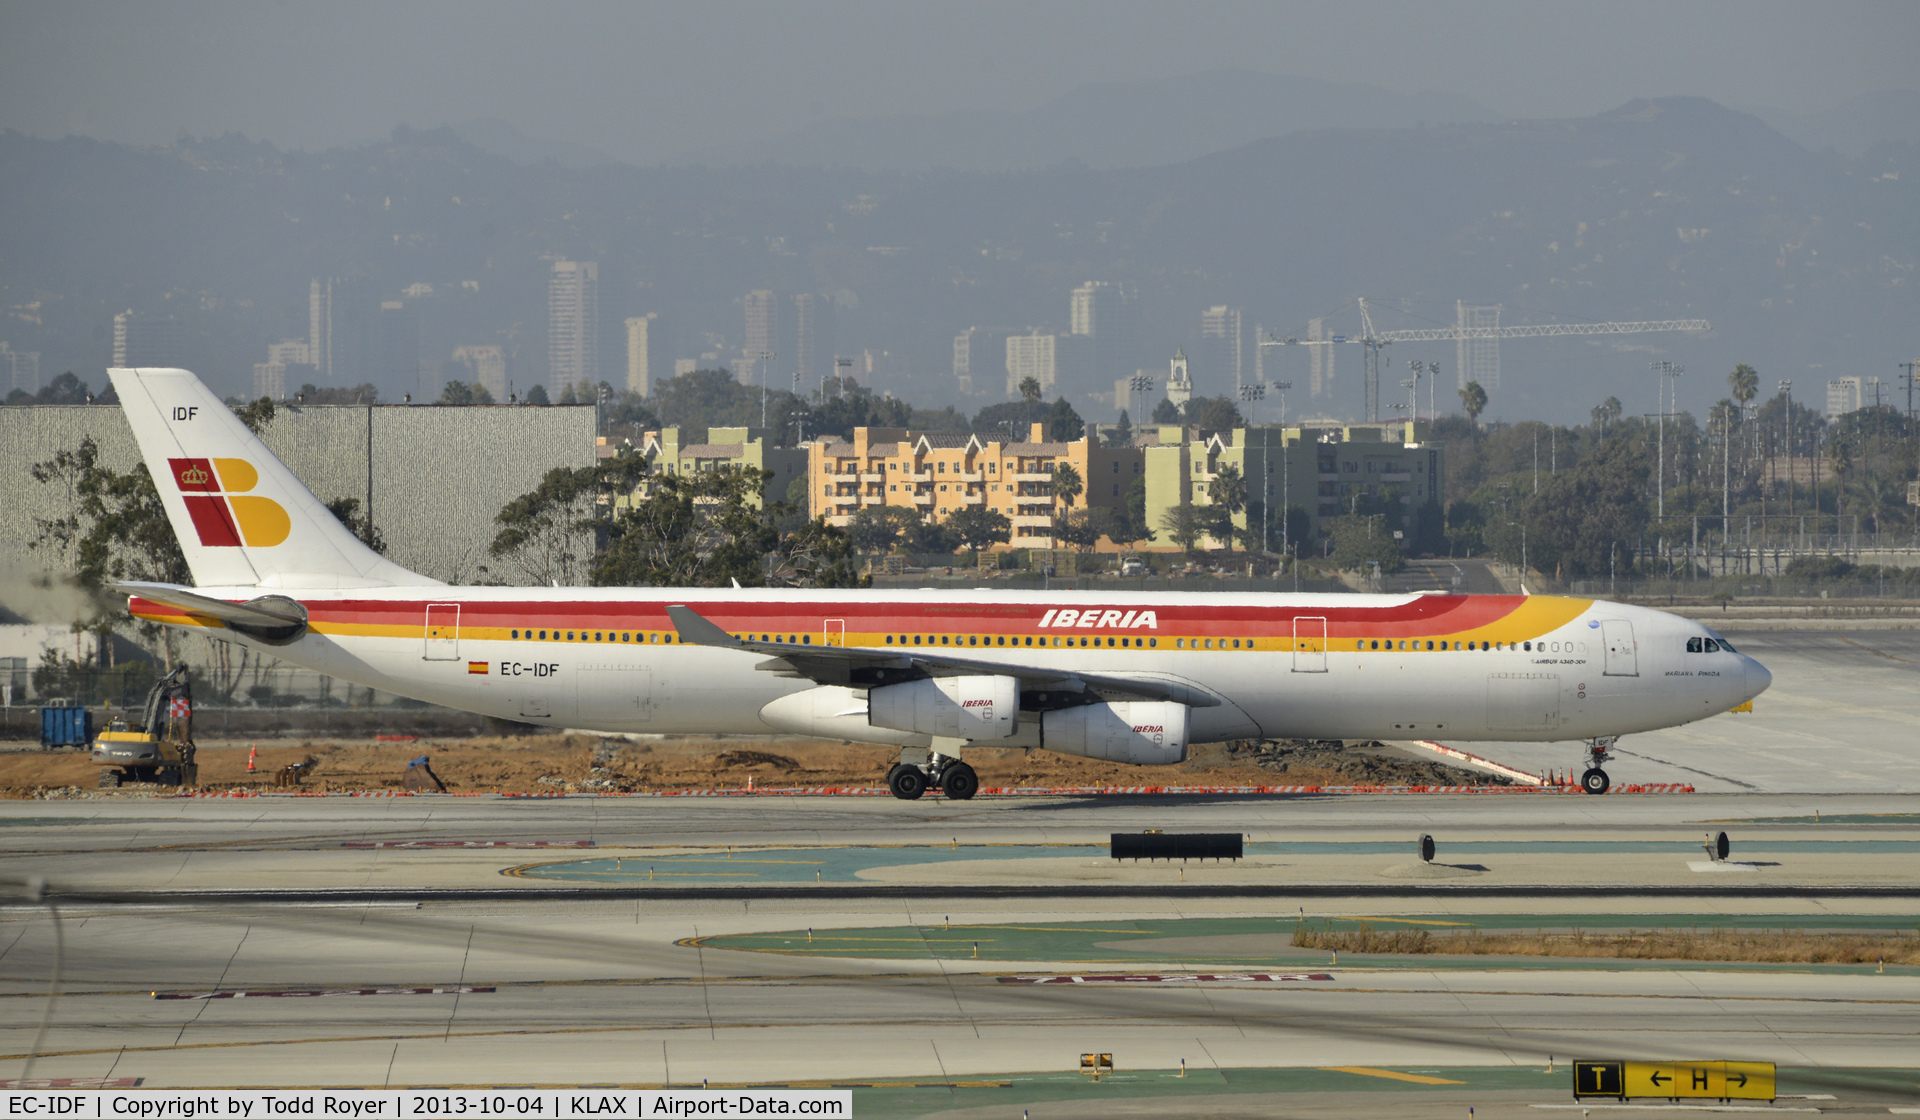 EC-IDF, 2002 Airbus A340-313X C/N 474, Taxiing to parking at LAX